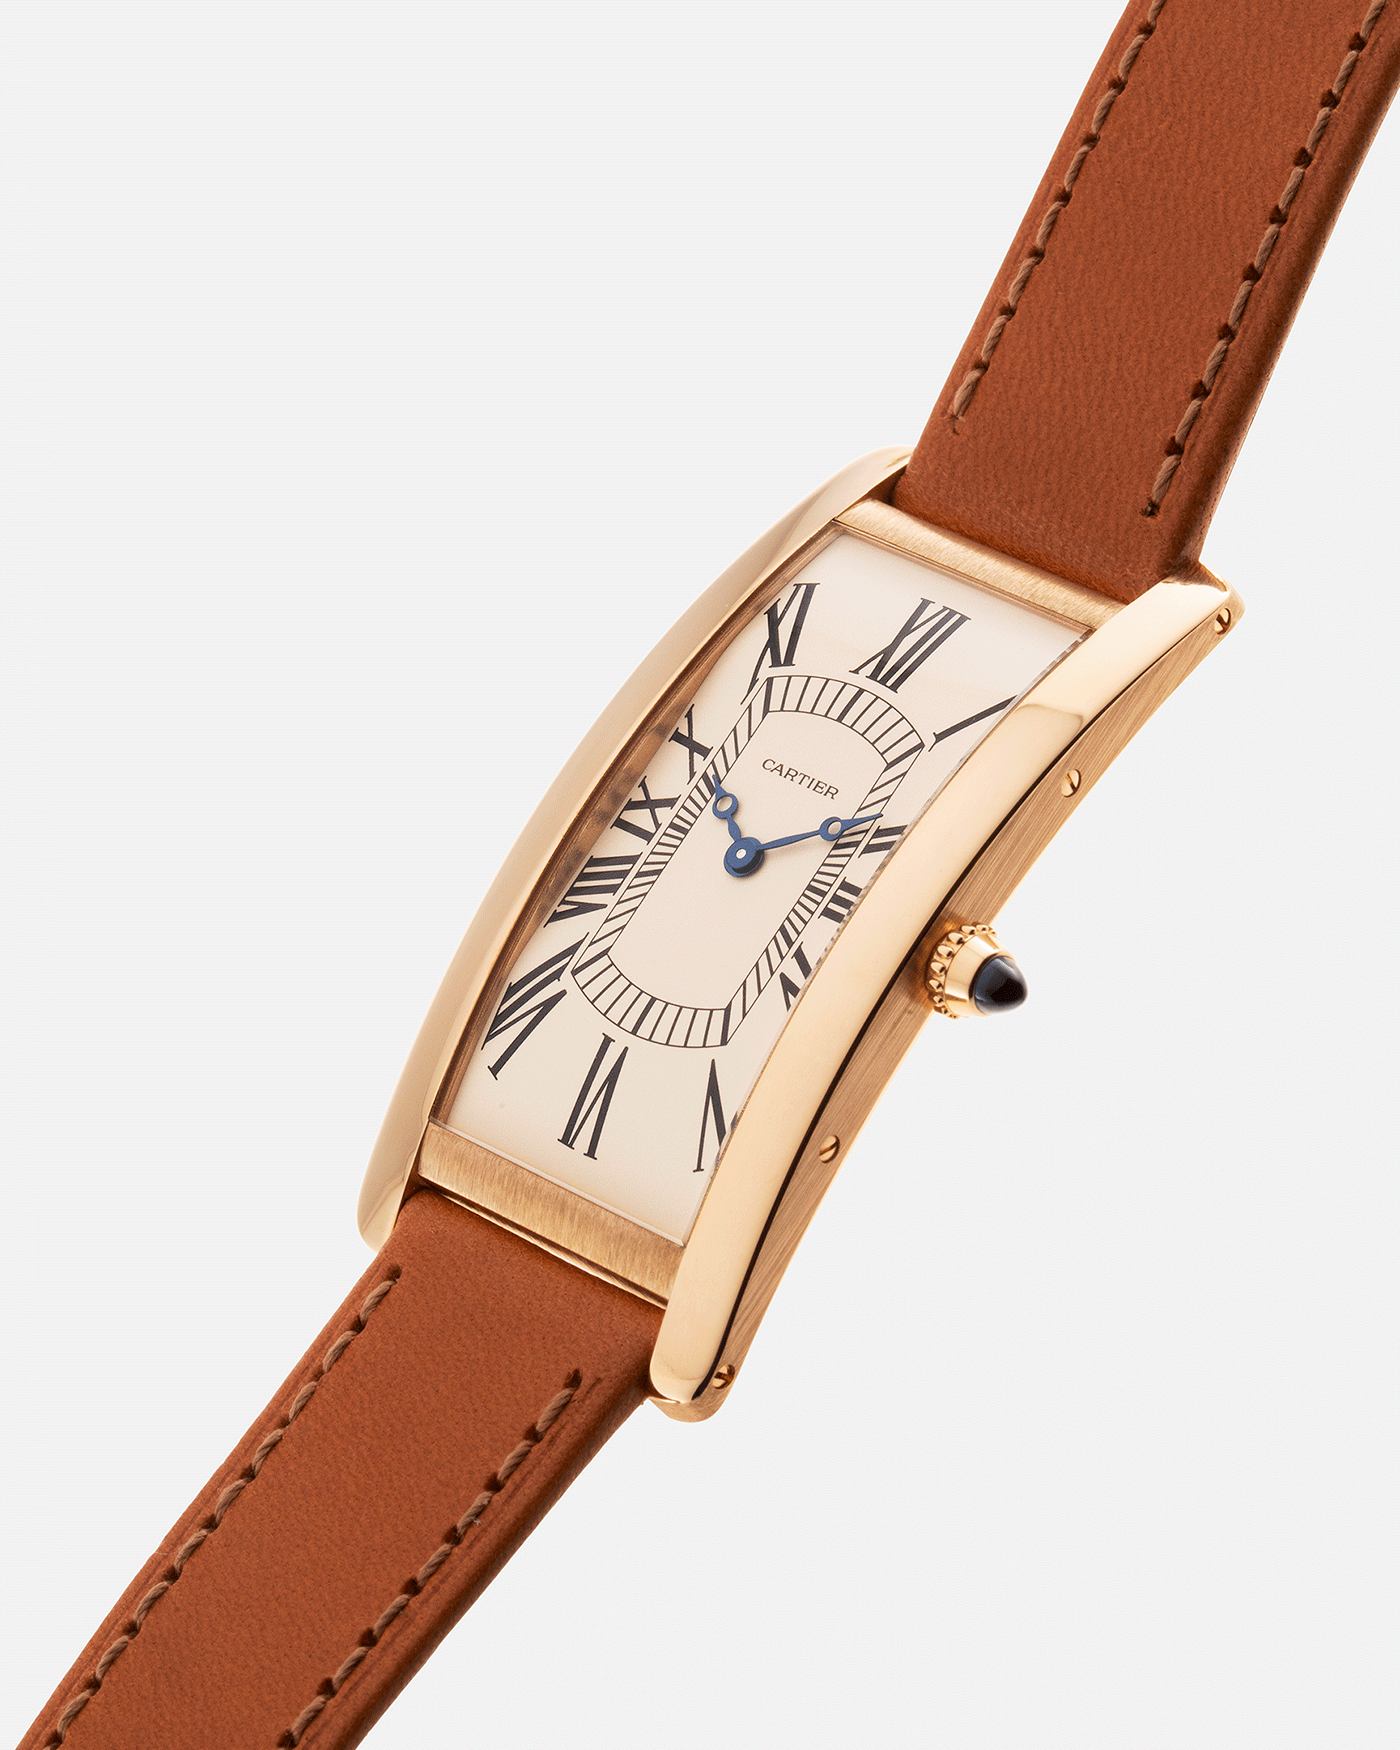 Brand: Cartier Year: 2021 Model: Tank Cintree Reference: 2718 Material: 18k Yellow Gold Movement: Jaeger Le Coultre manual wind caliber 9780MC Case Diameter: 46 x 23 mm, 6.4mm thick Strap: Cartier Chestnut Brown Leather Strap and 18k Yellow Gold Tang Buckle